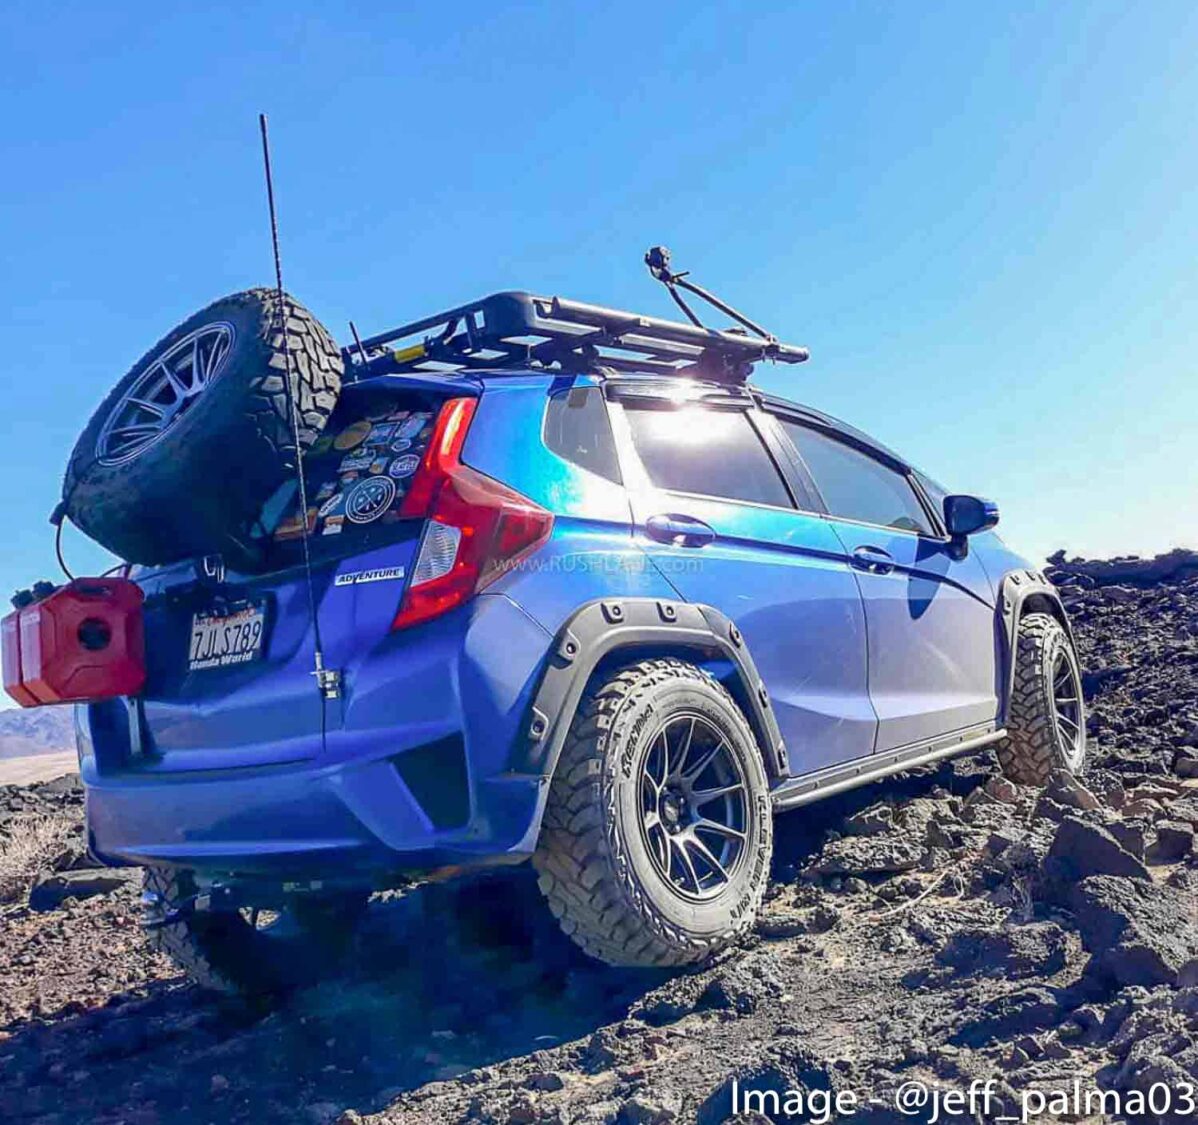  Honda Jazz modified  into an Offroader Can put 4x4 SUVs 